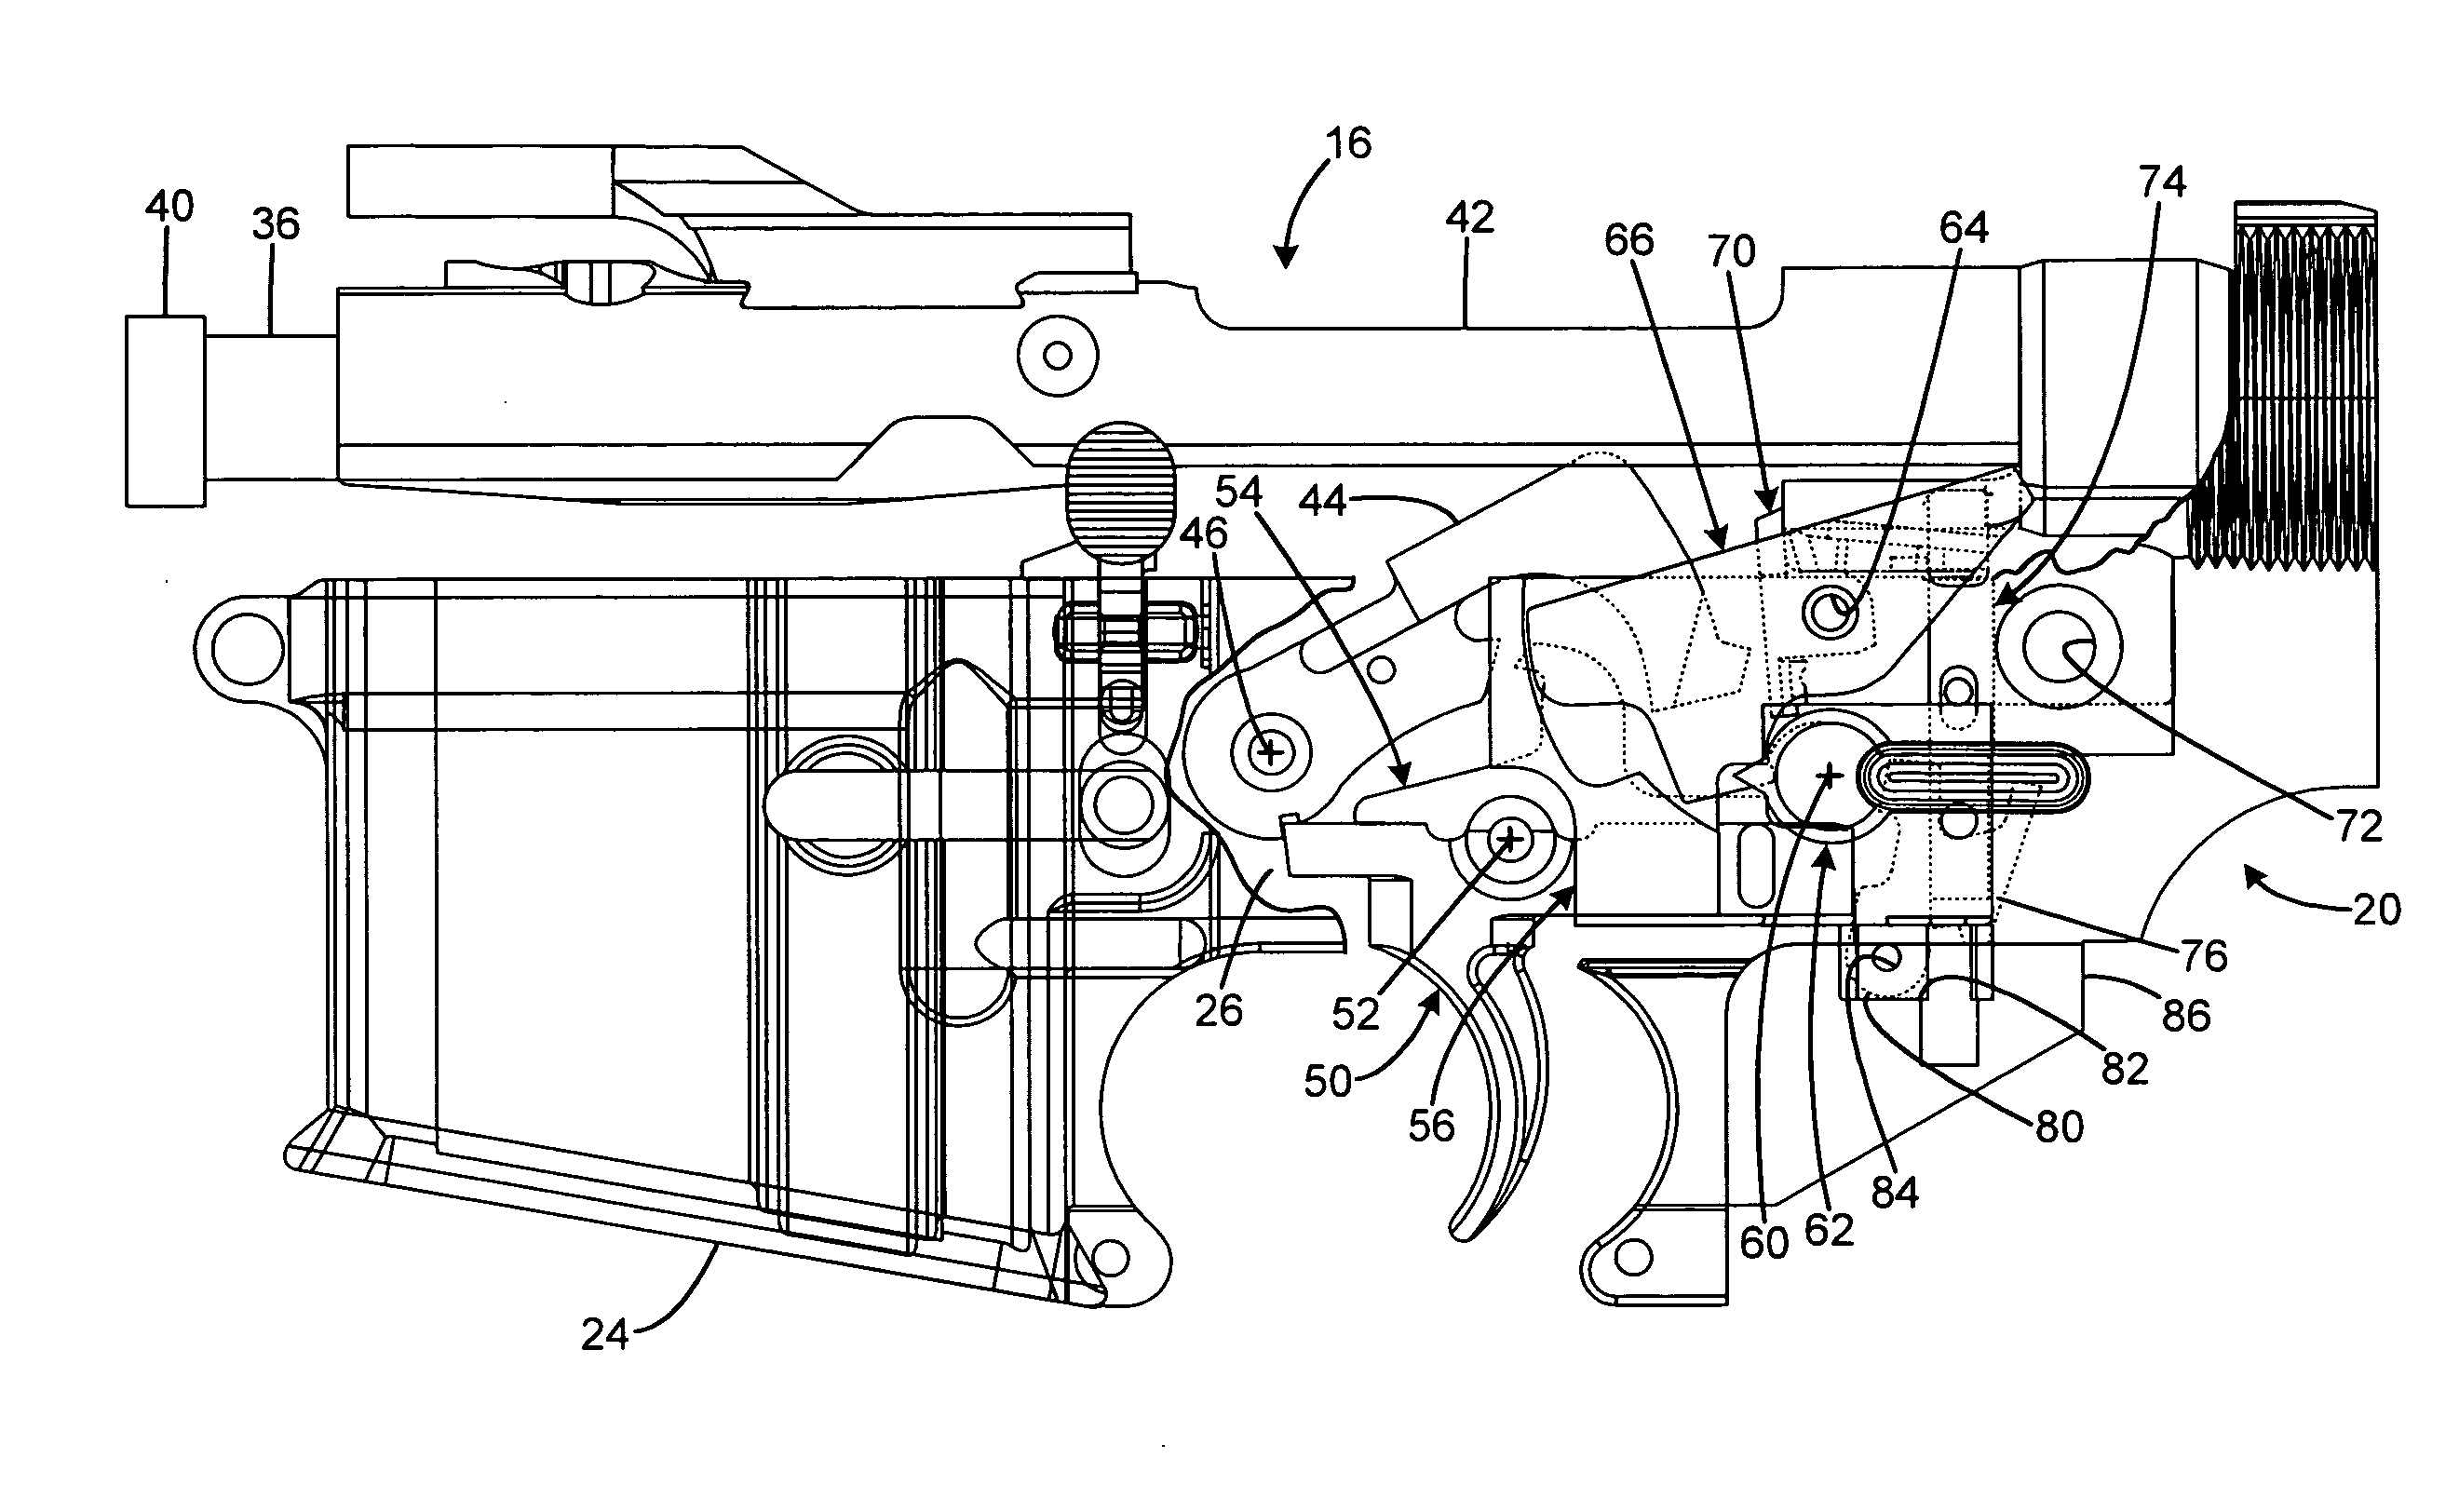 Firearm with facility for open-bolt and closed-bolt operation